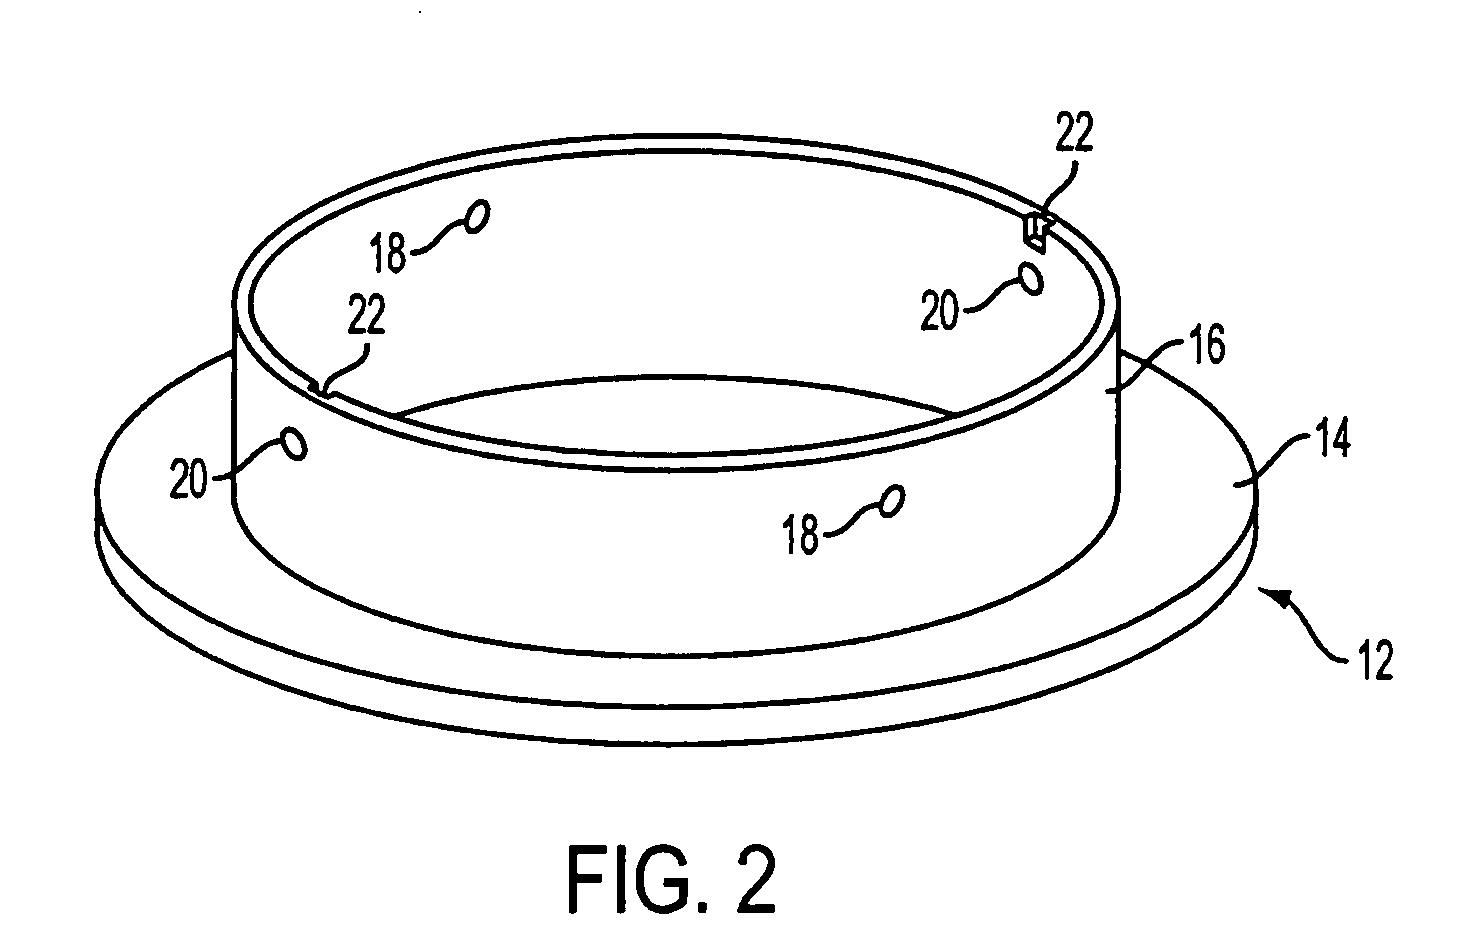 Modular port system and replacement method thereof